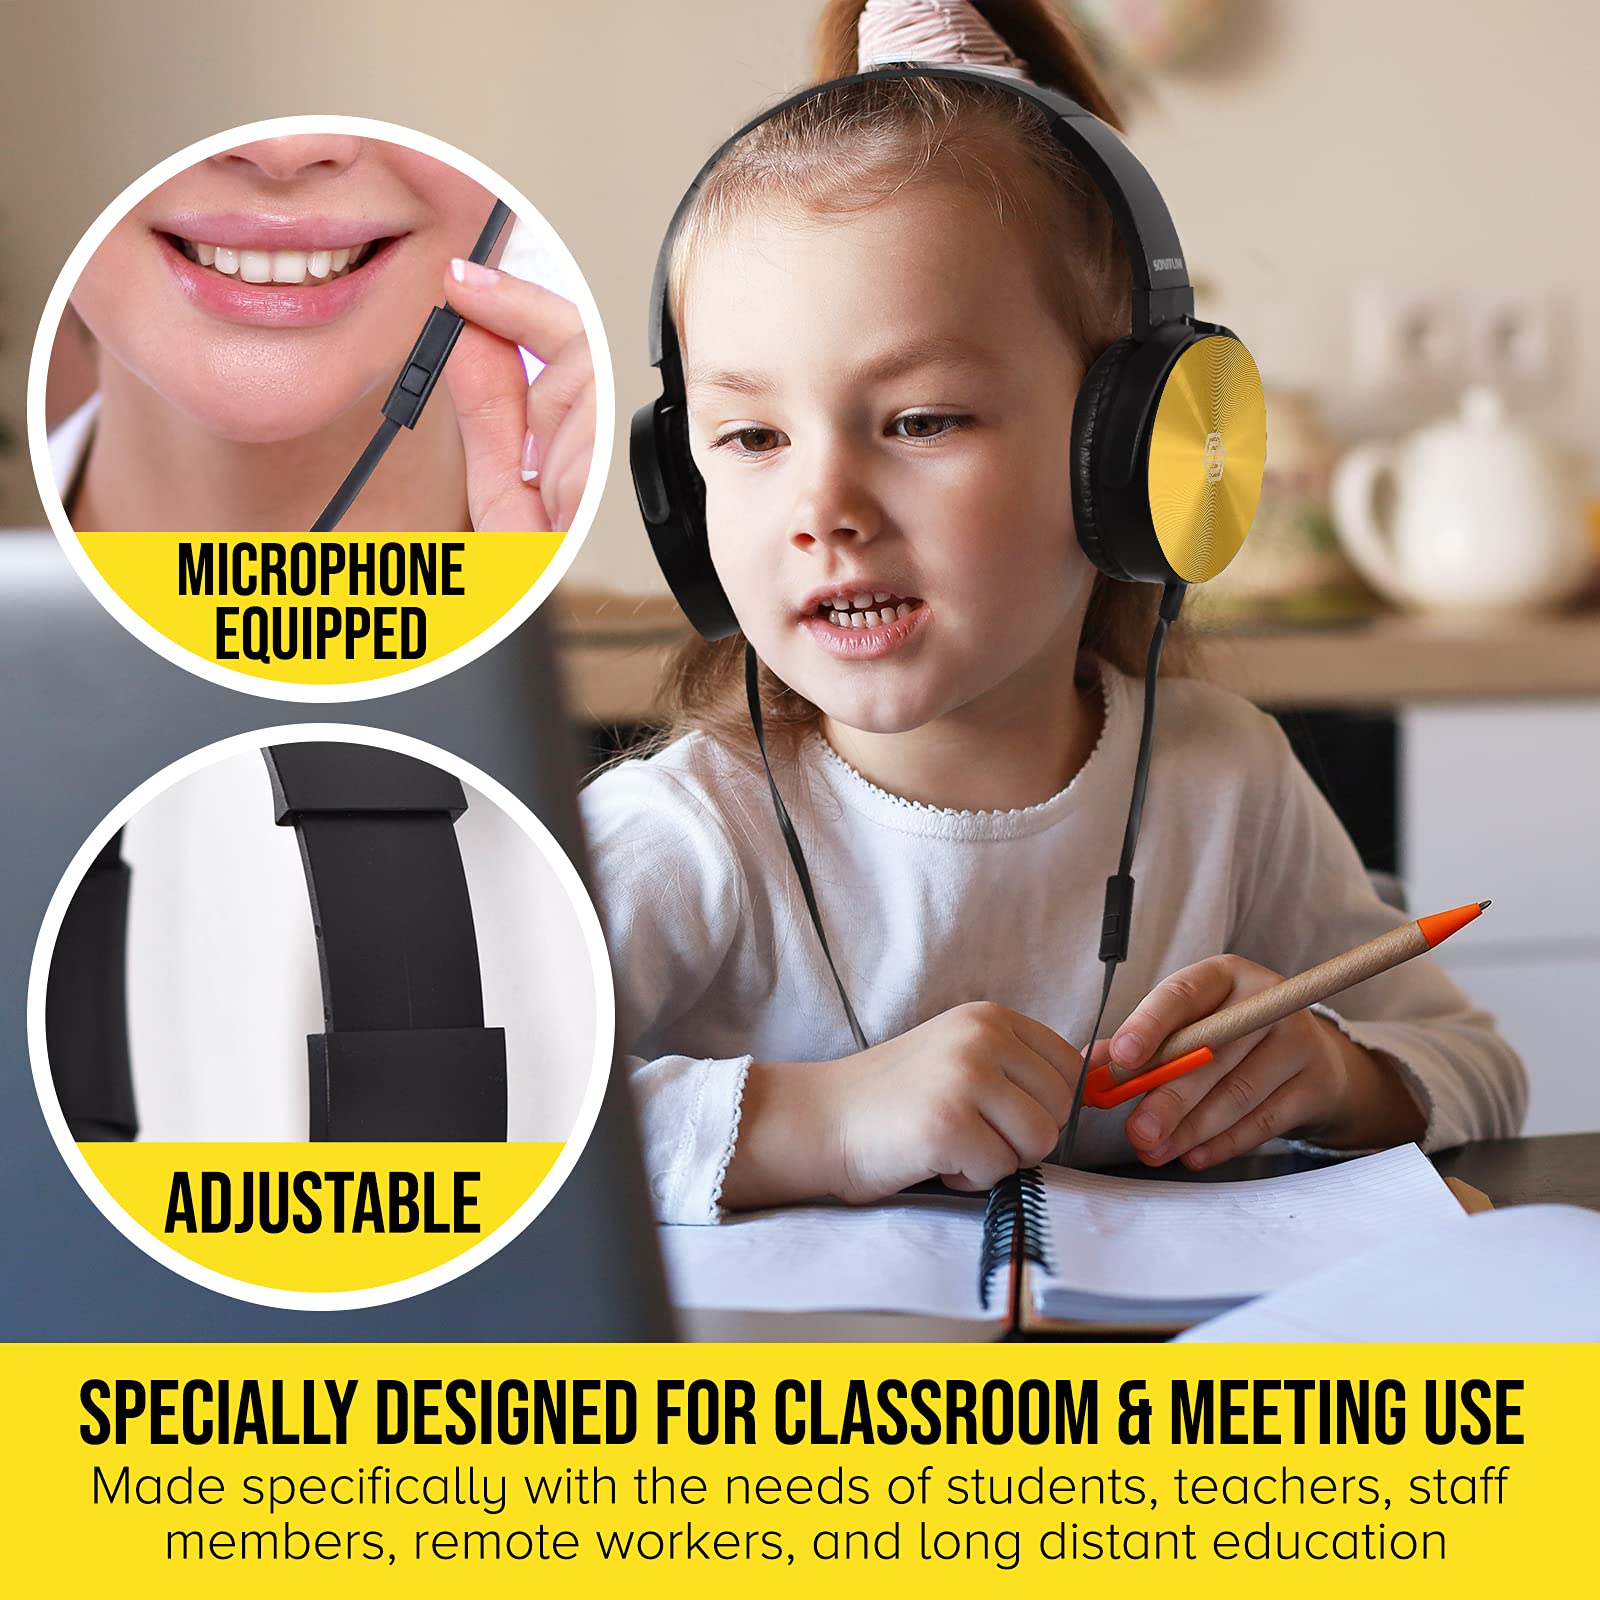 Premium Classroom Headphone with Microphone (5 Pack) - Kids Wired Earphones with Mic for School Students K-12 & Teachers, Soft Swivel On Ear Pads- Perfect for E-Learning, Meetings, Calls -(Colorful)